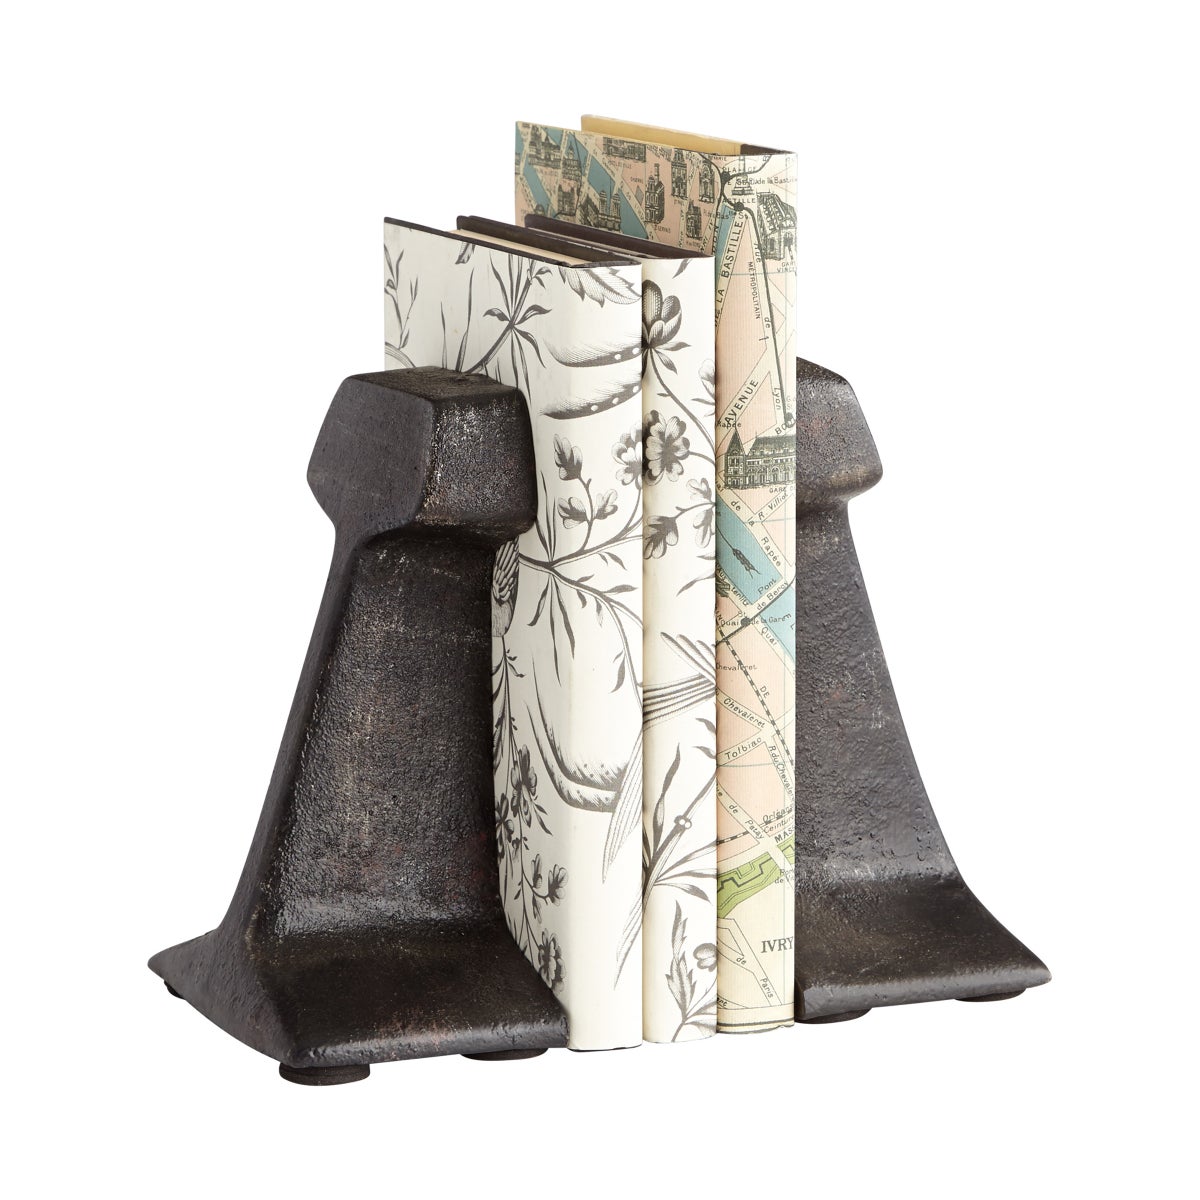 Smithy Bookends | Zinc - Small